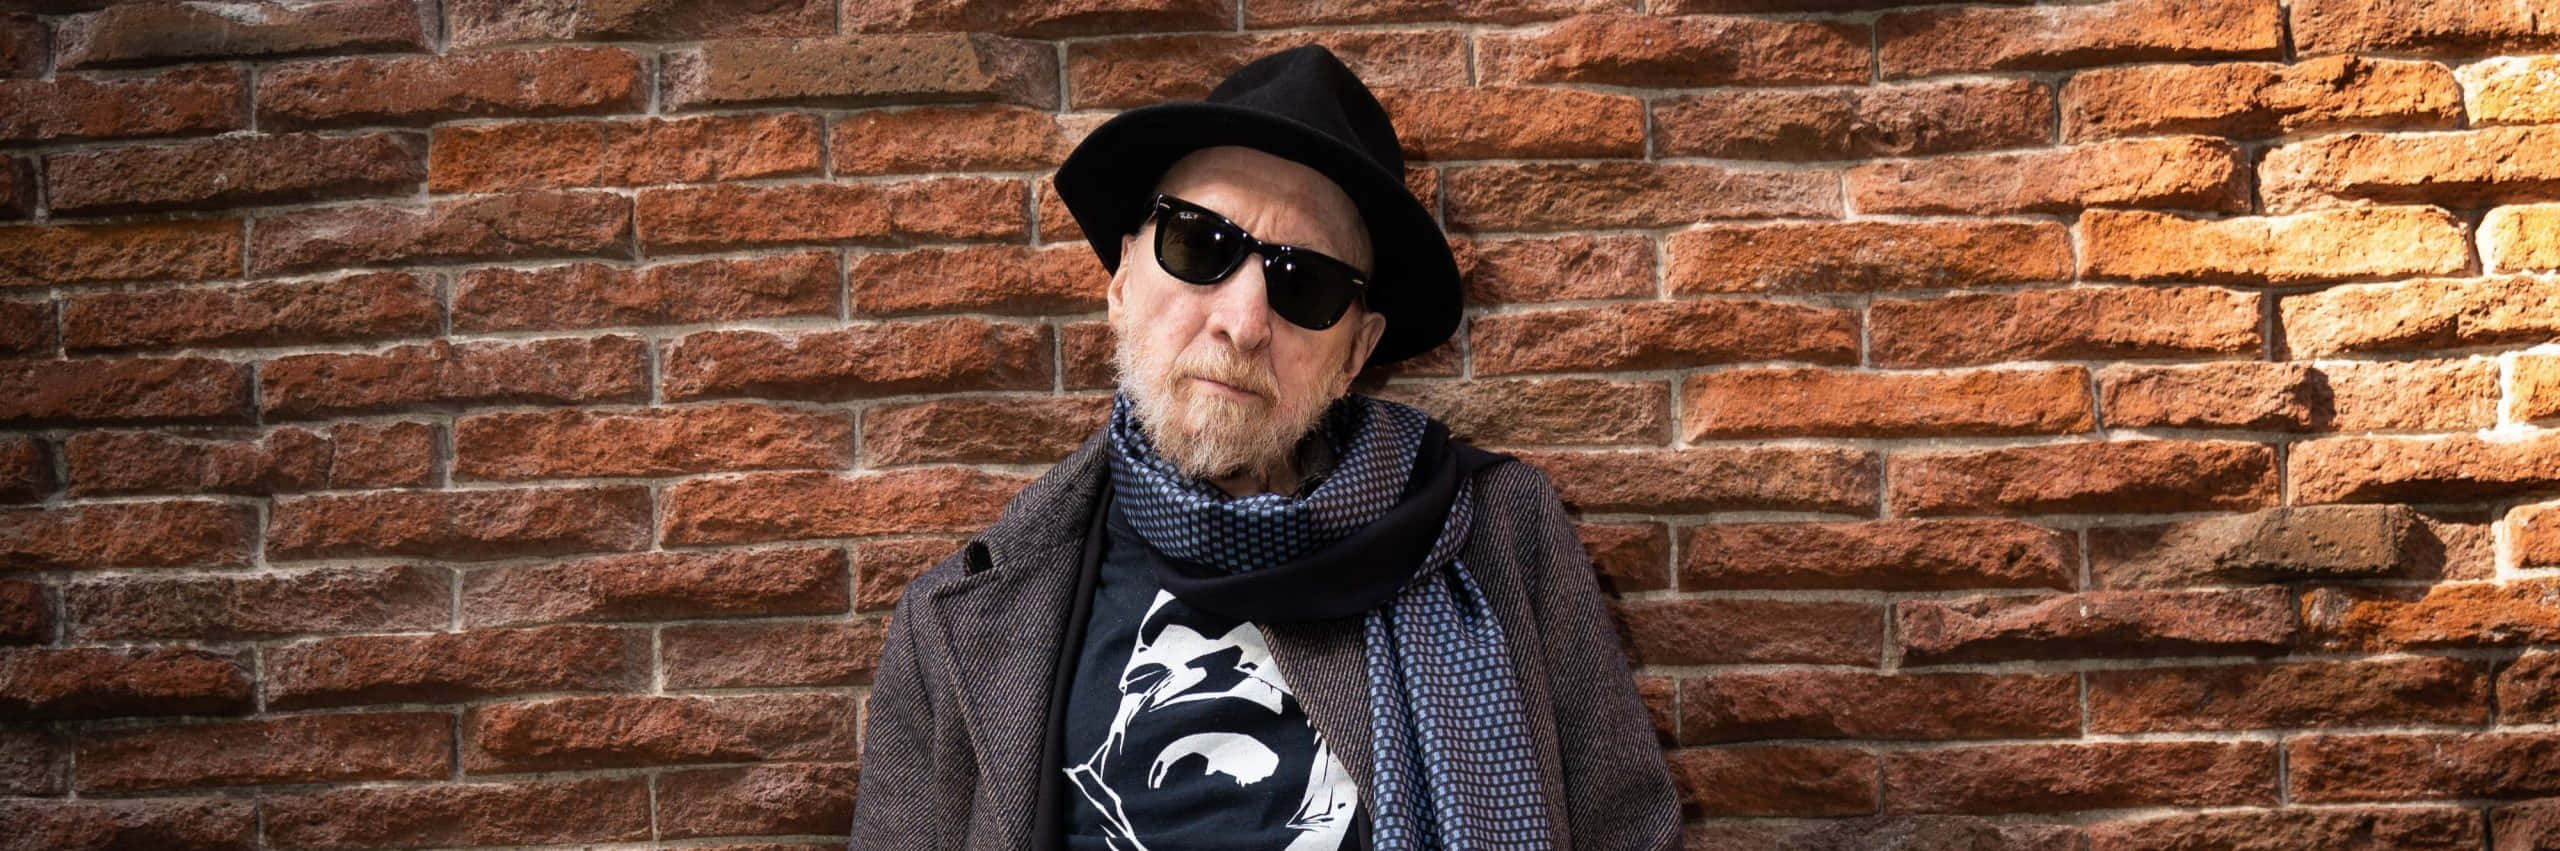 Frank Miller standing with his artwork in the background Wallpaper